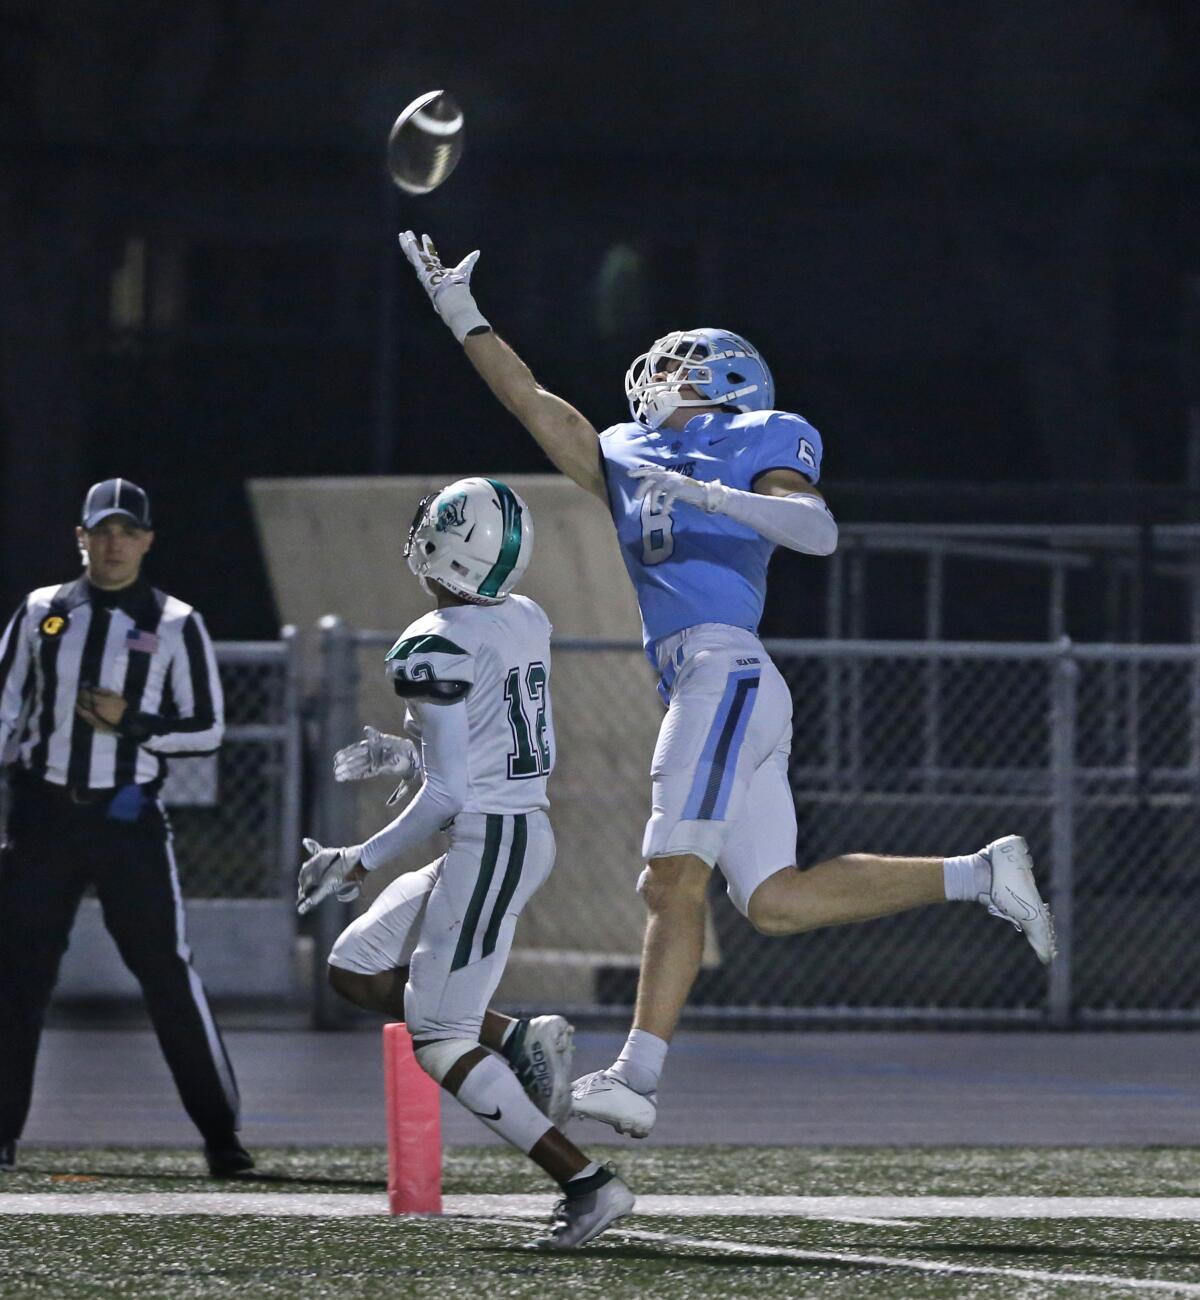 Corona del Mar's John Humphreys (6), pictured stretching out for a pass against Oceanside on Dec. 7, is expected to play in Saturday's CIF State Division 1-A title game. He tweaked his hamstring last week.